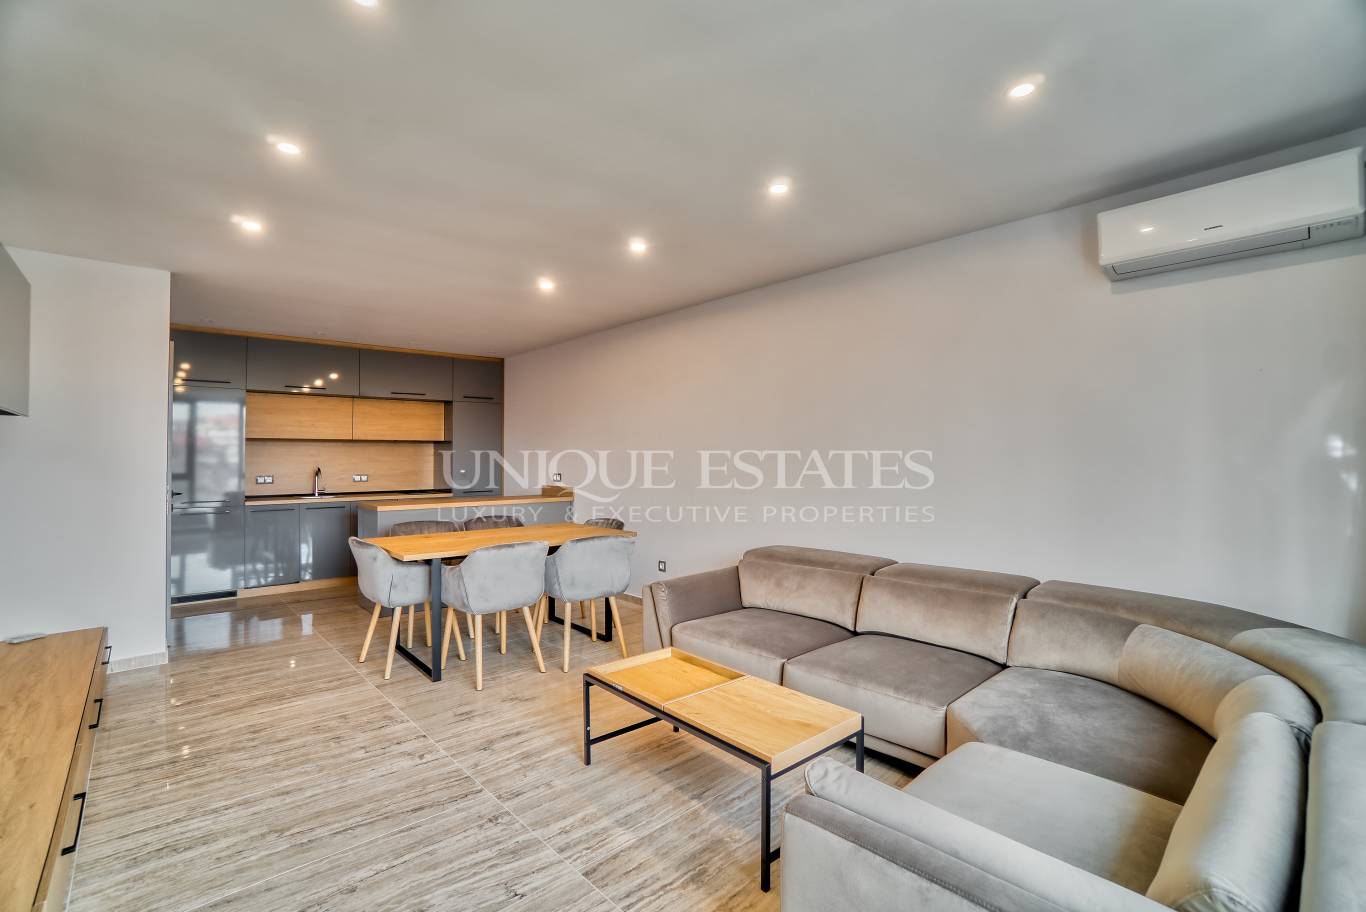 Apartment for rent in Sofia, Boyana with listing ID: N16421 - image 1